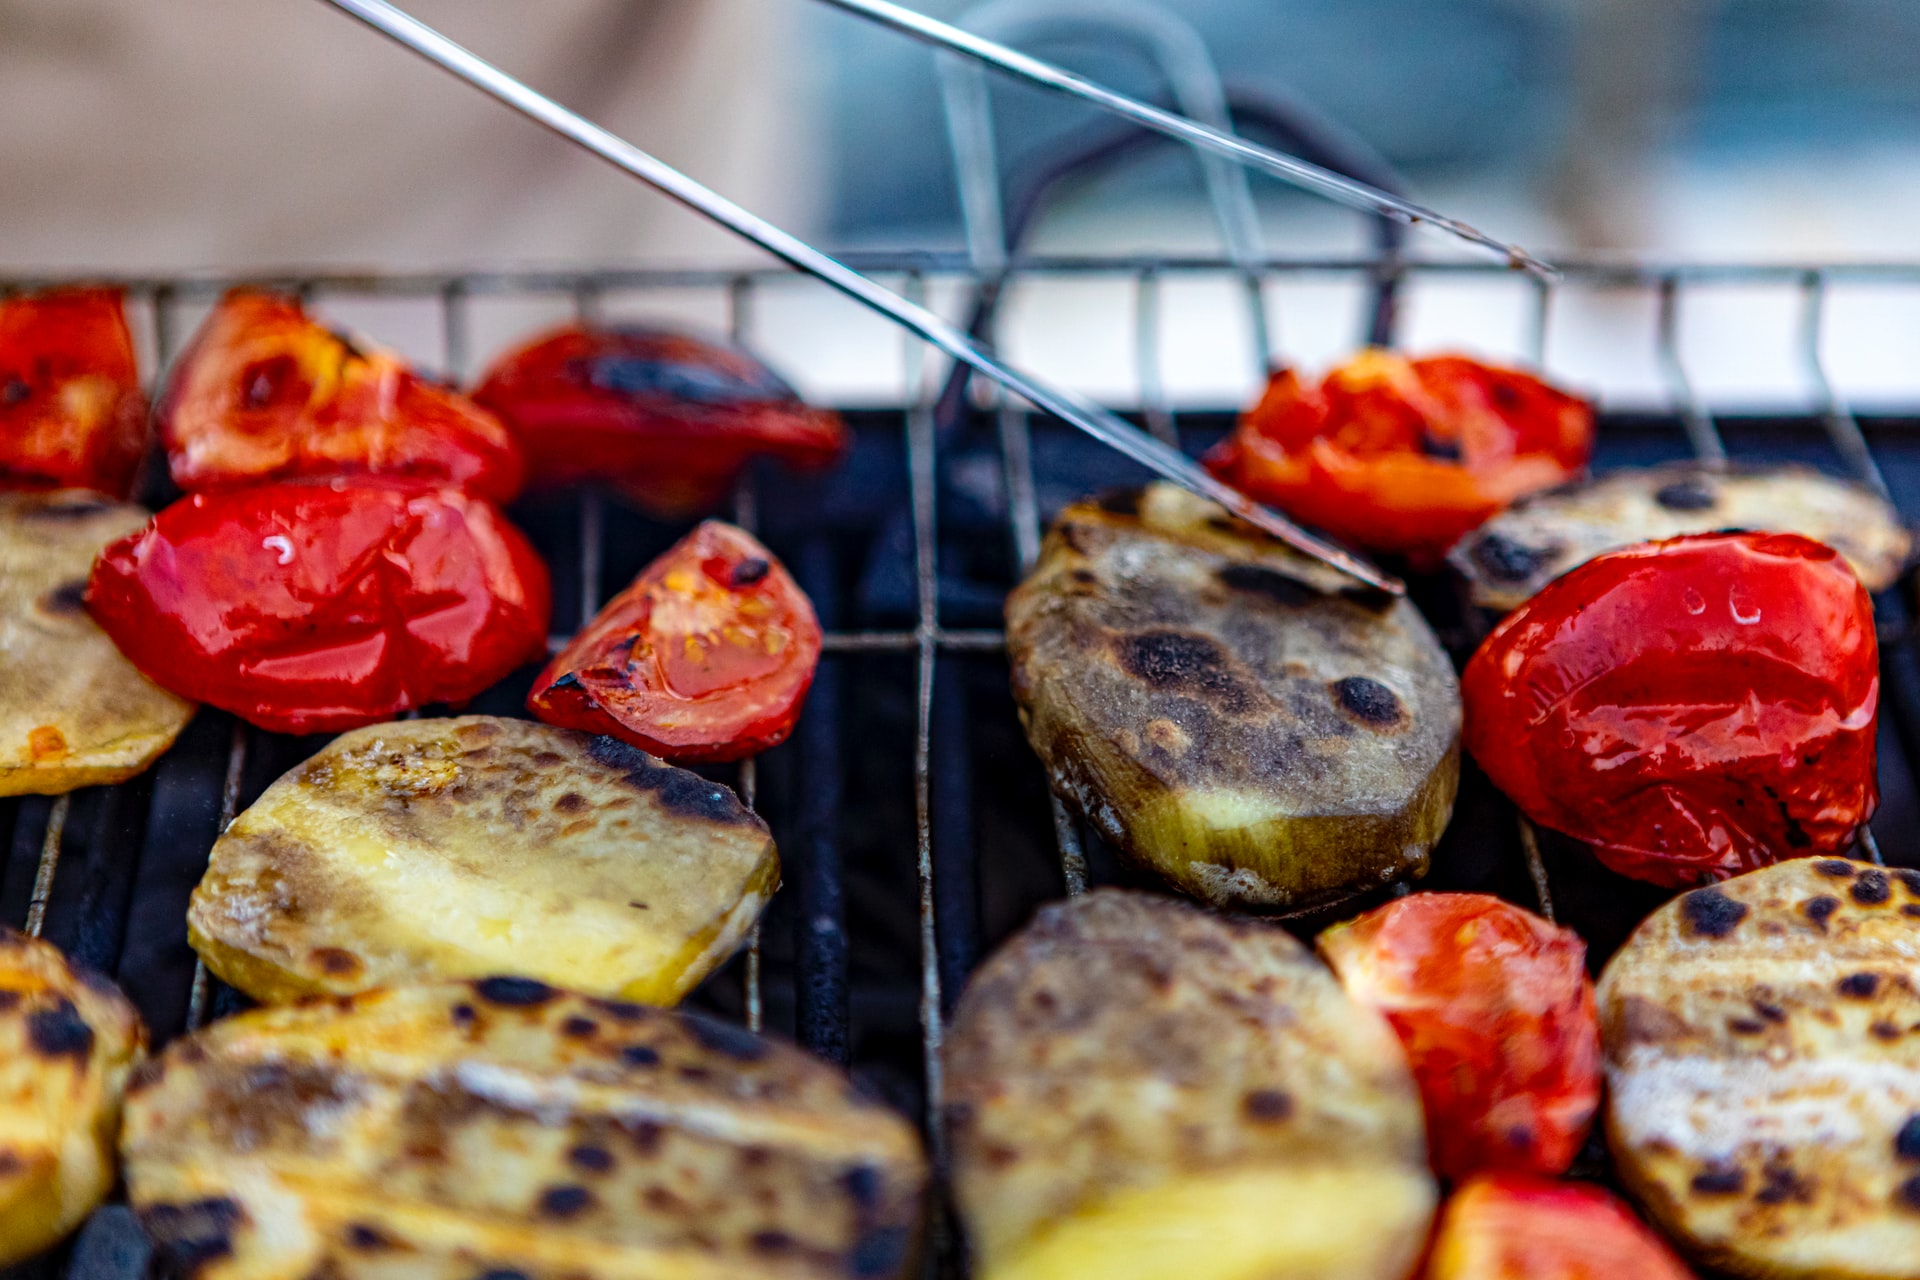 Close-up grill shot of plump red tomatoes and potatoes with char